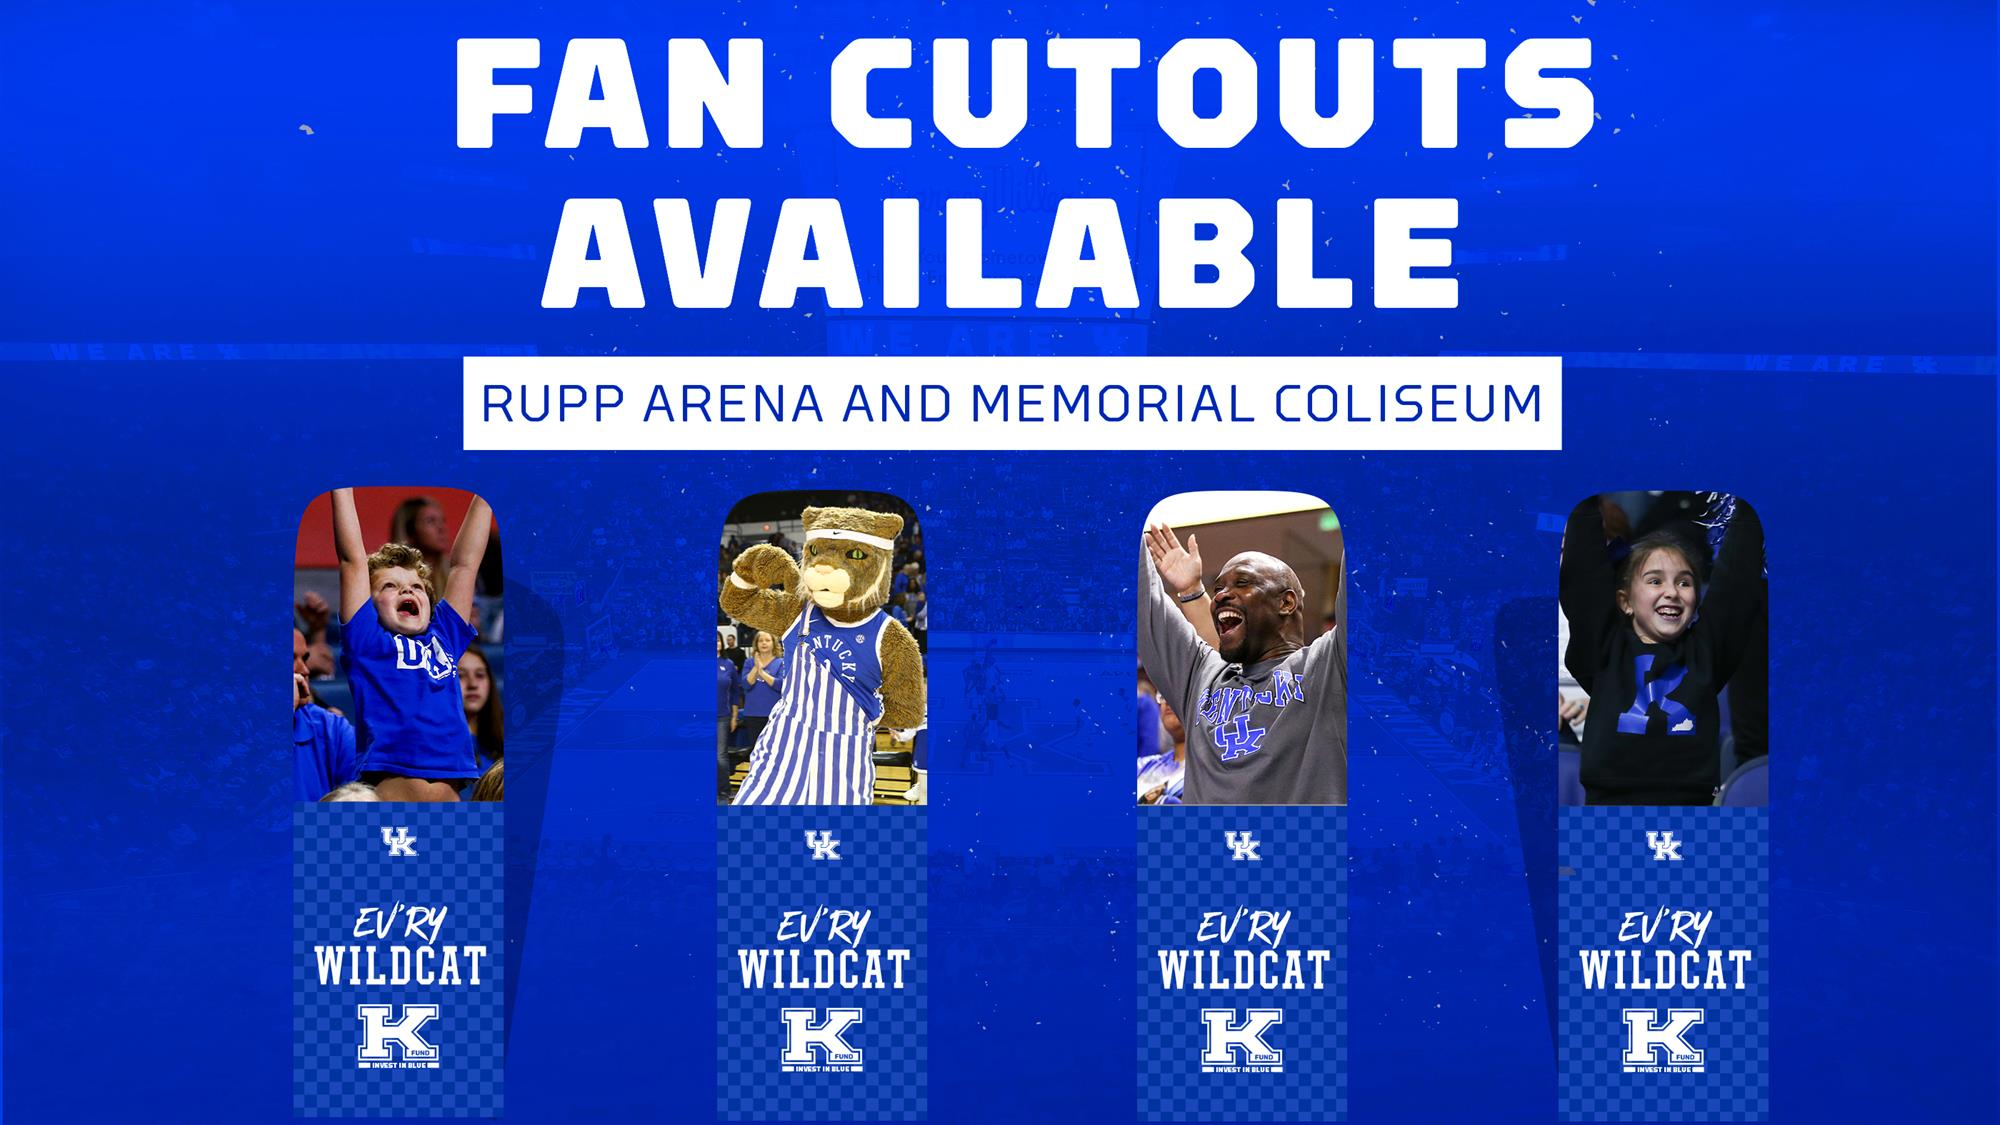 UK Athletics to Offer Fan Cutouts for Rupp Arena, Memorial Coliseum